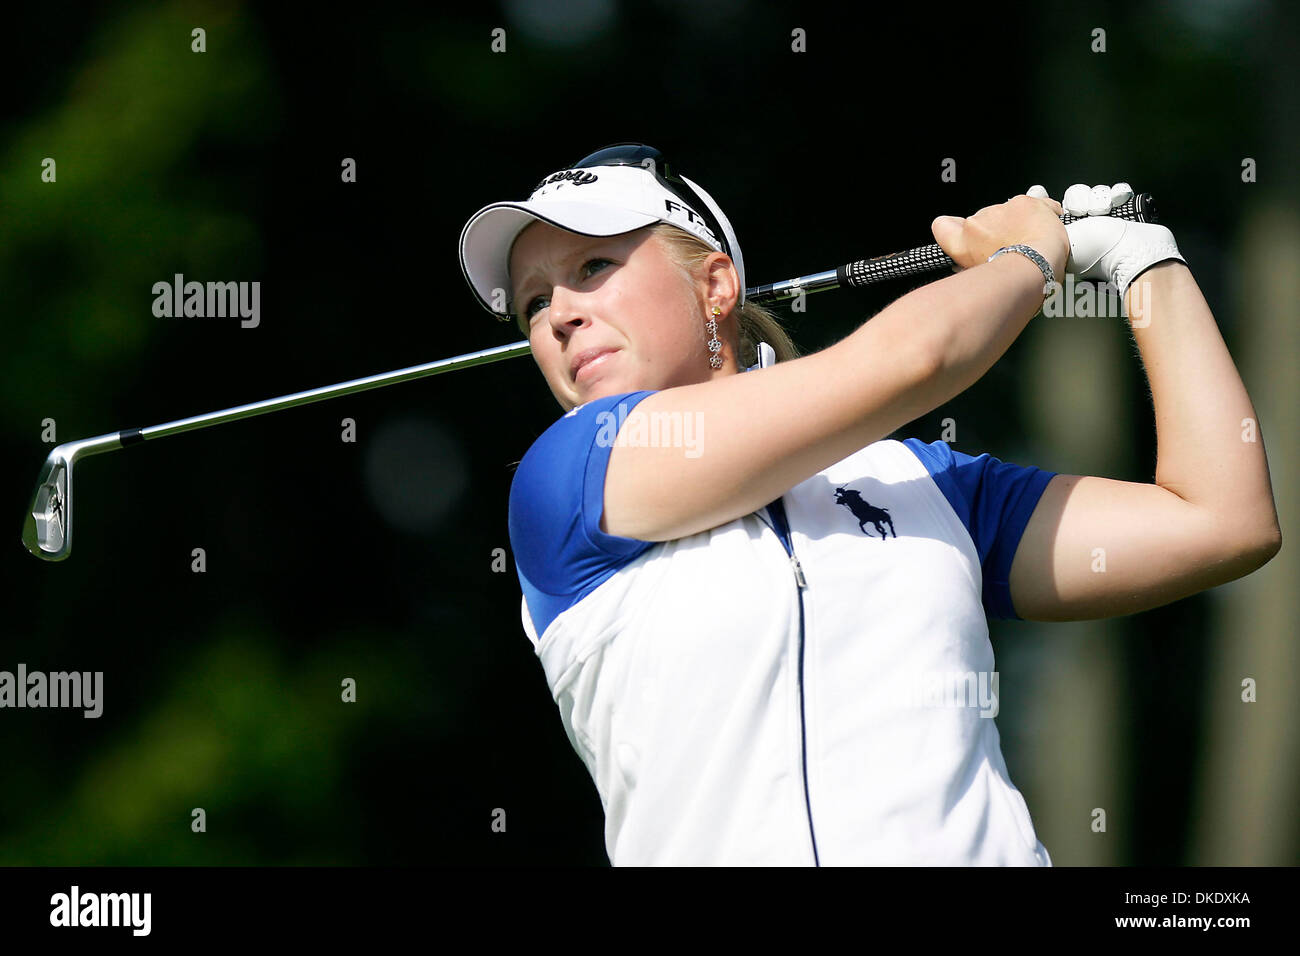 Jun 08, 2007 - Havre de Grace, Maryland, USA - 19 year old MORGAN PRESSEL tees off at hole 3  at the McDonalds LPGA Champaionship event on Thursday. Pressel finished the first round tied for 4th place at 4 under par   (Credit Image: © James Berglie/ZUMA Press) Stock Photo